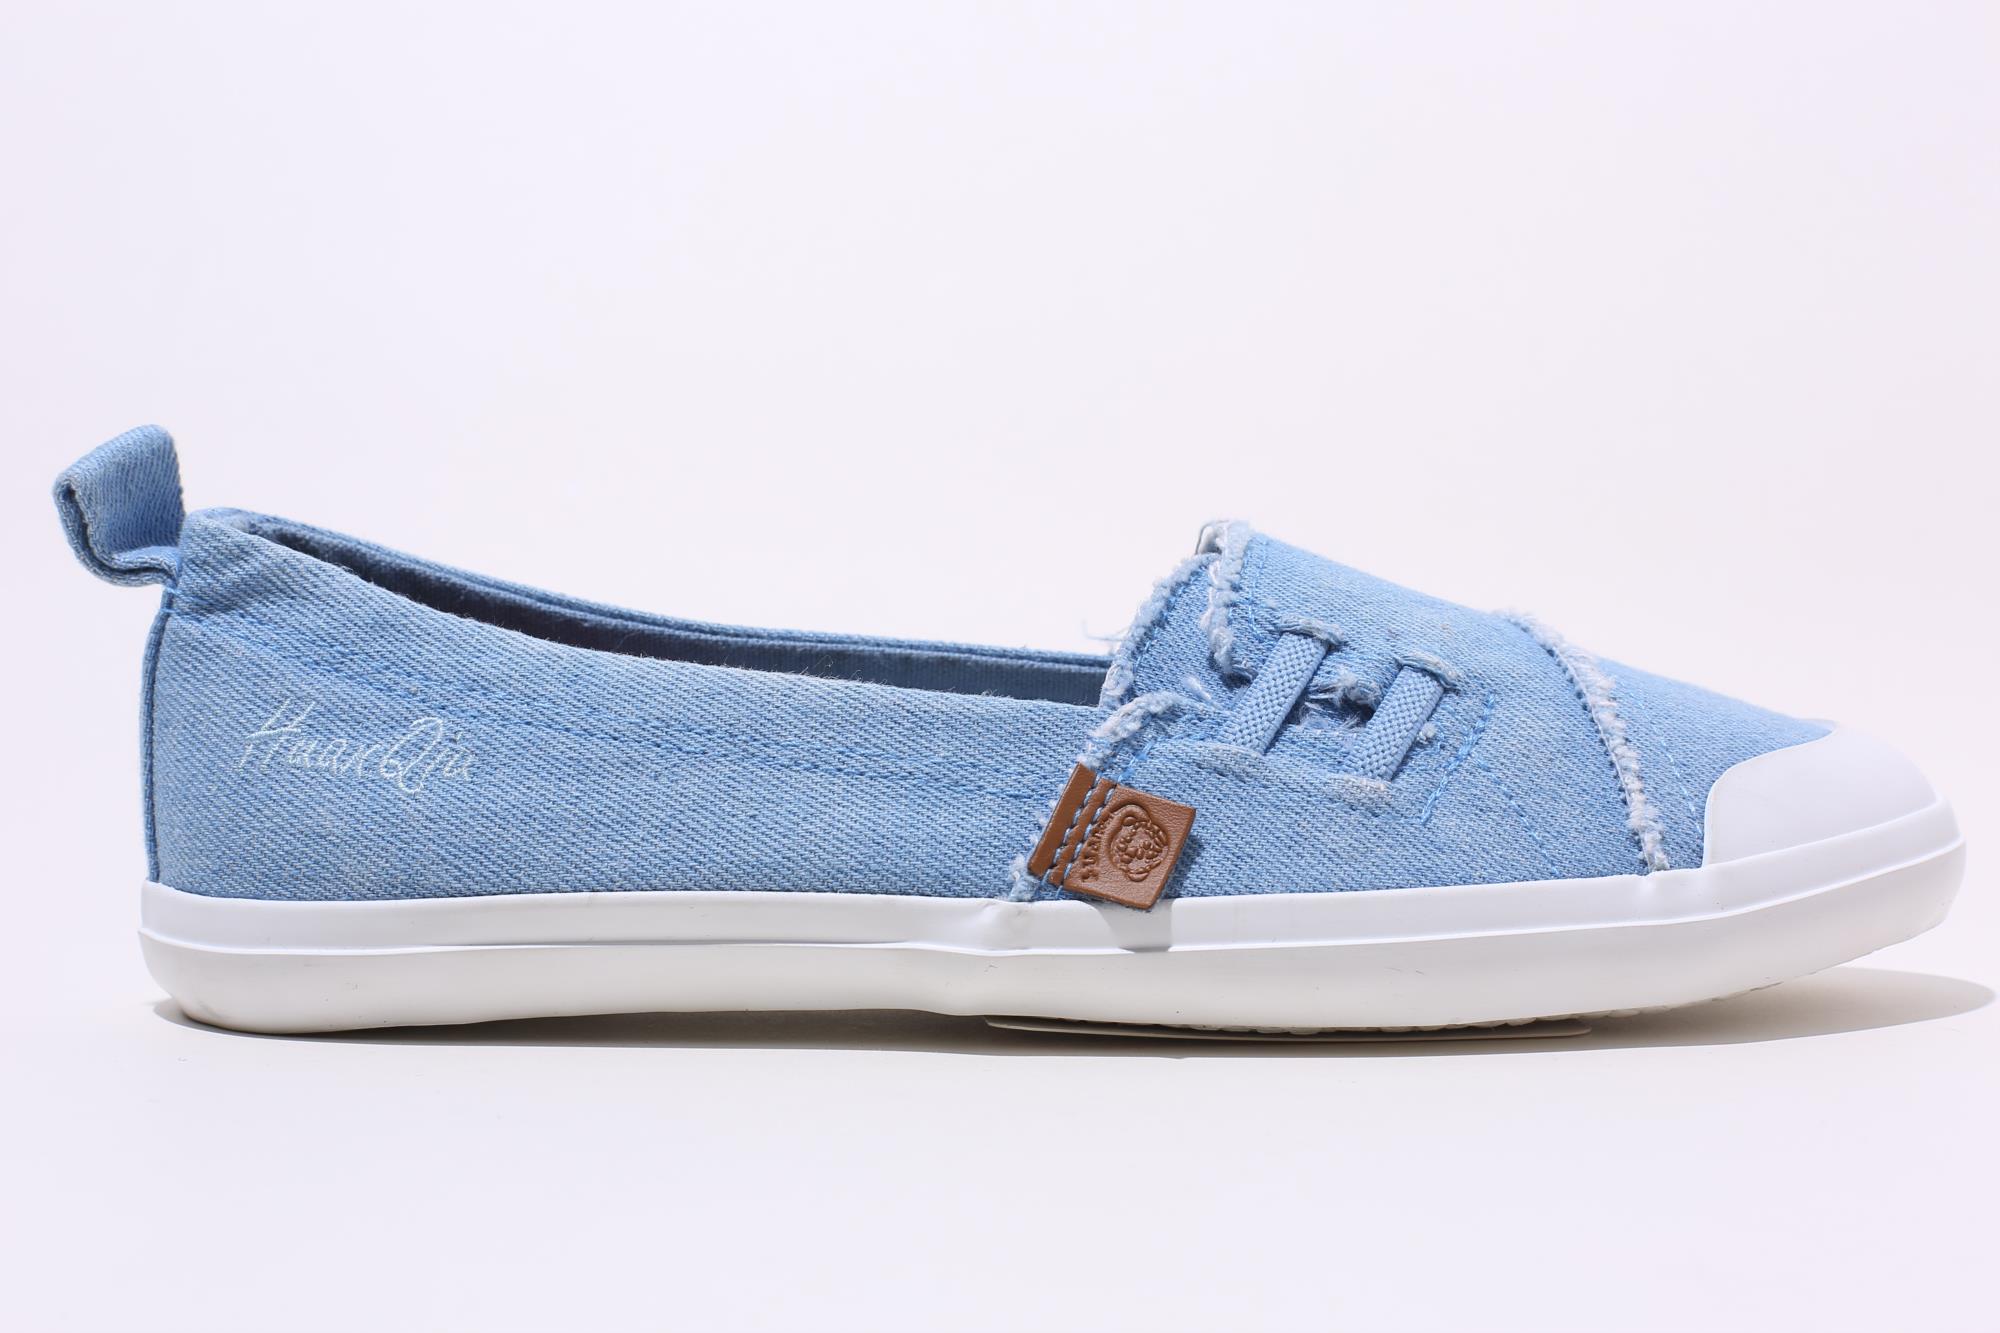 Newest design top quality custom blue white canvas casual shoes